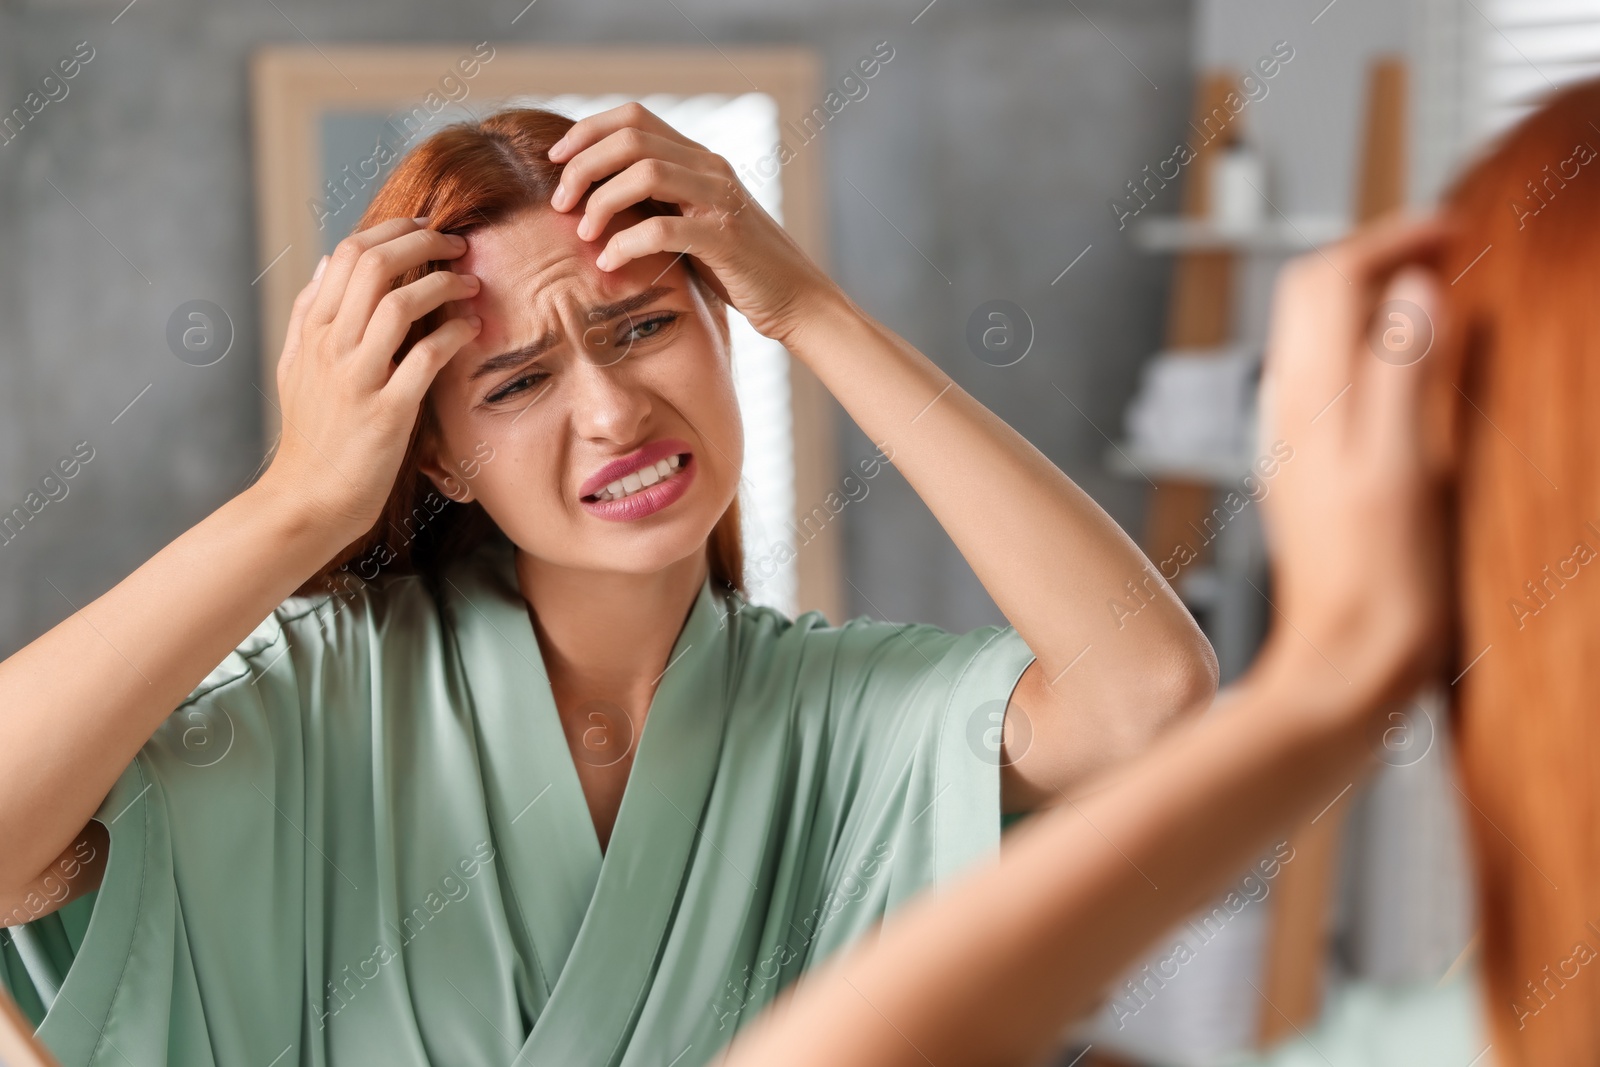 Photo of Suffering from allergy. Young woman checking her face near mirror in bathroom